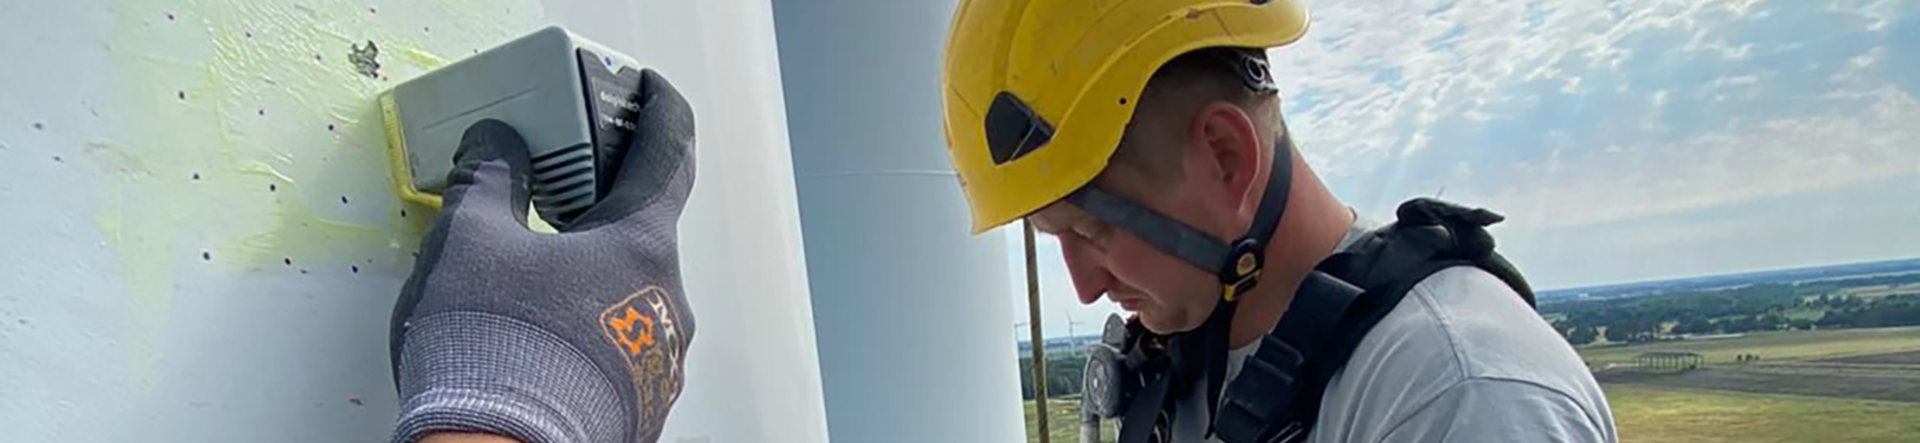 MAXIMISE WIND TURBINE UPTIME WITH FAST, ACCURATE INSPECTIONS OF BLADES AND COMPONENTS, NDT companies